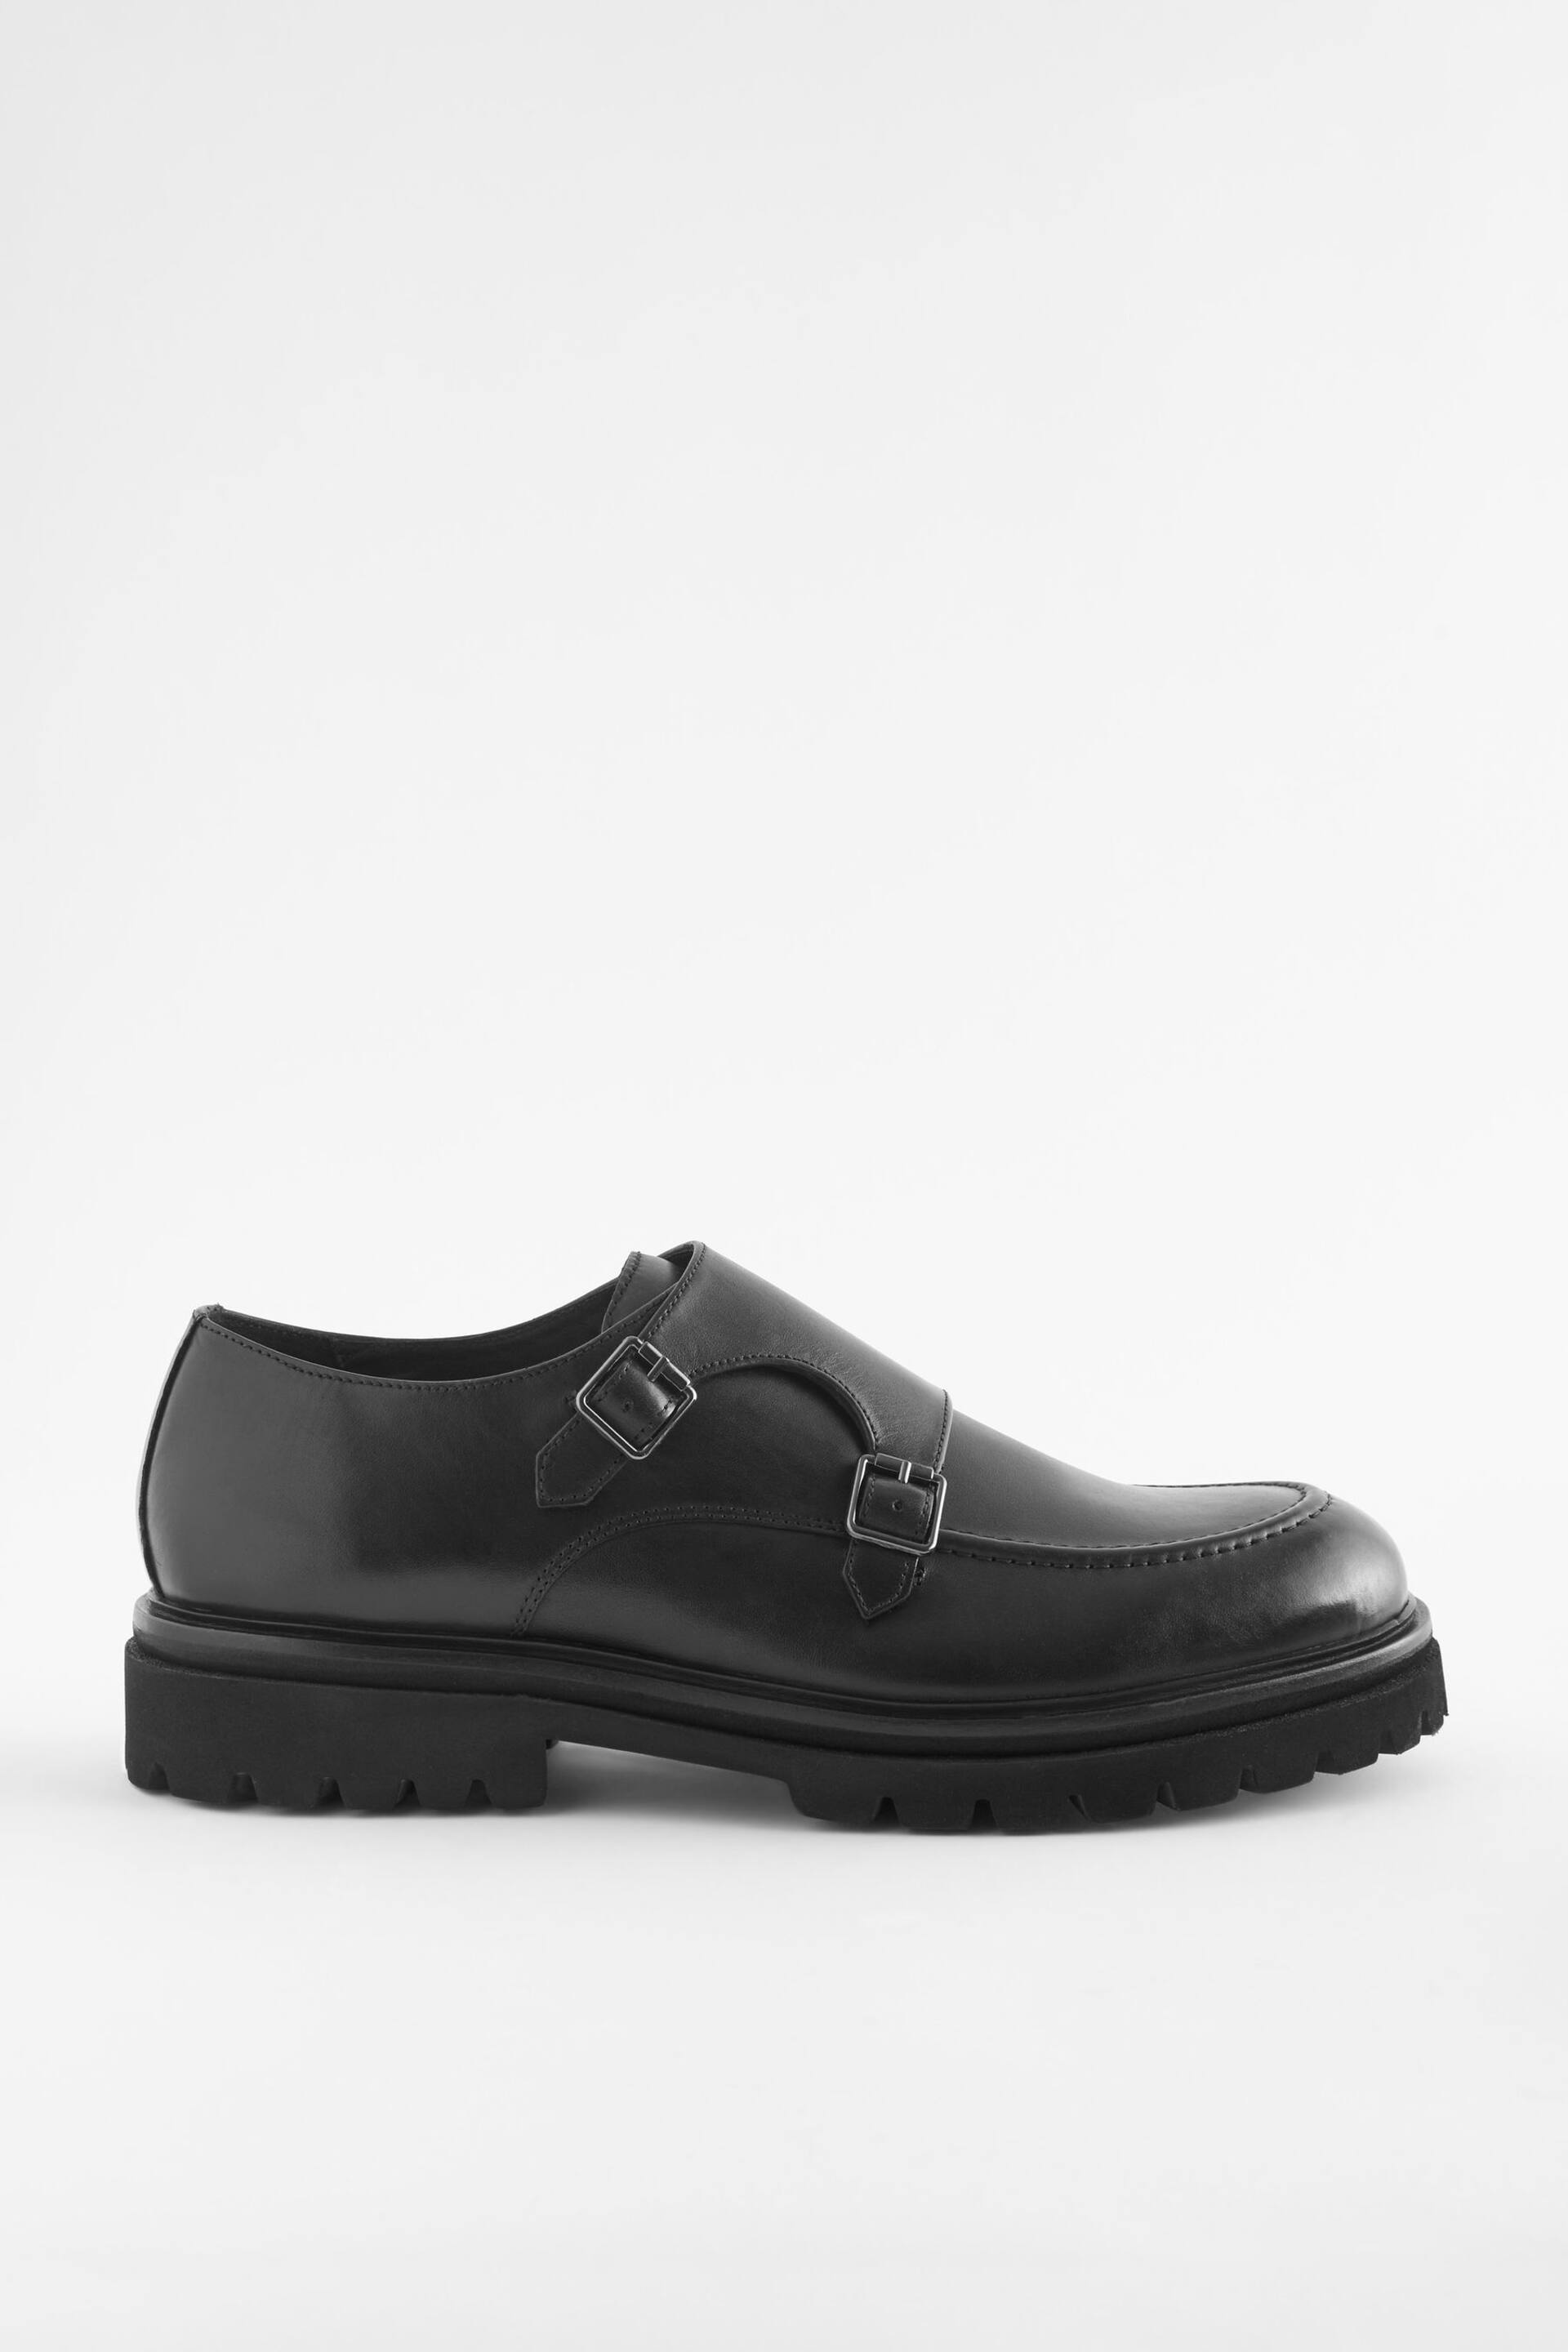 Black EDIT Cleated Leather Monk Shoes - Image 4 of 7